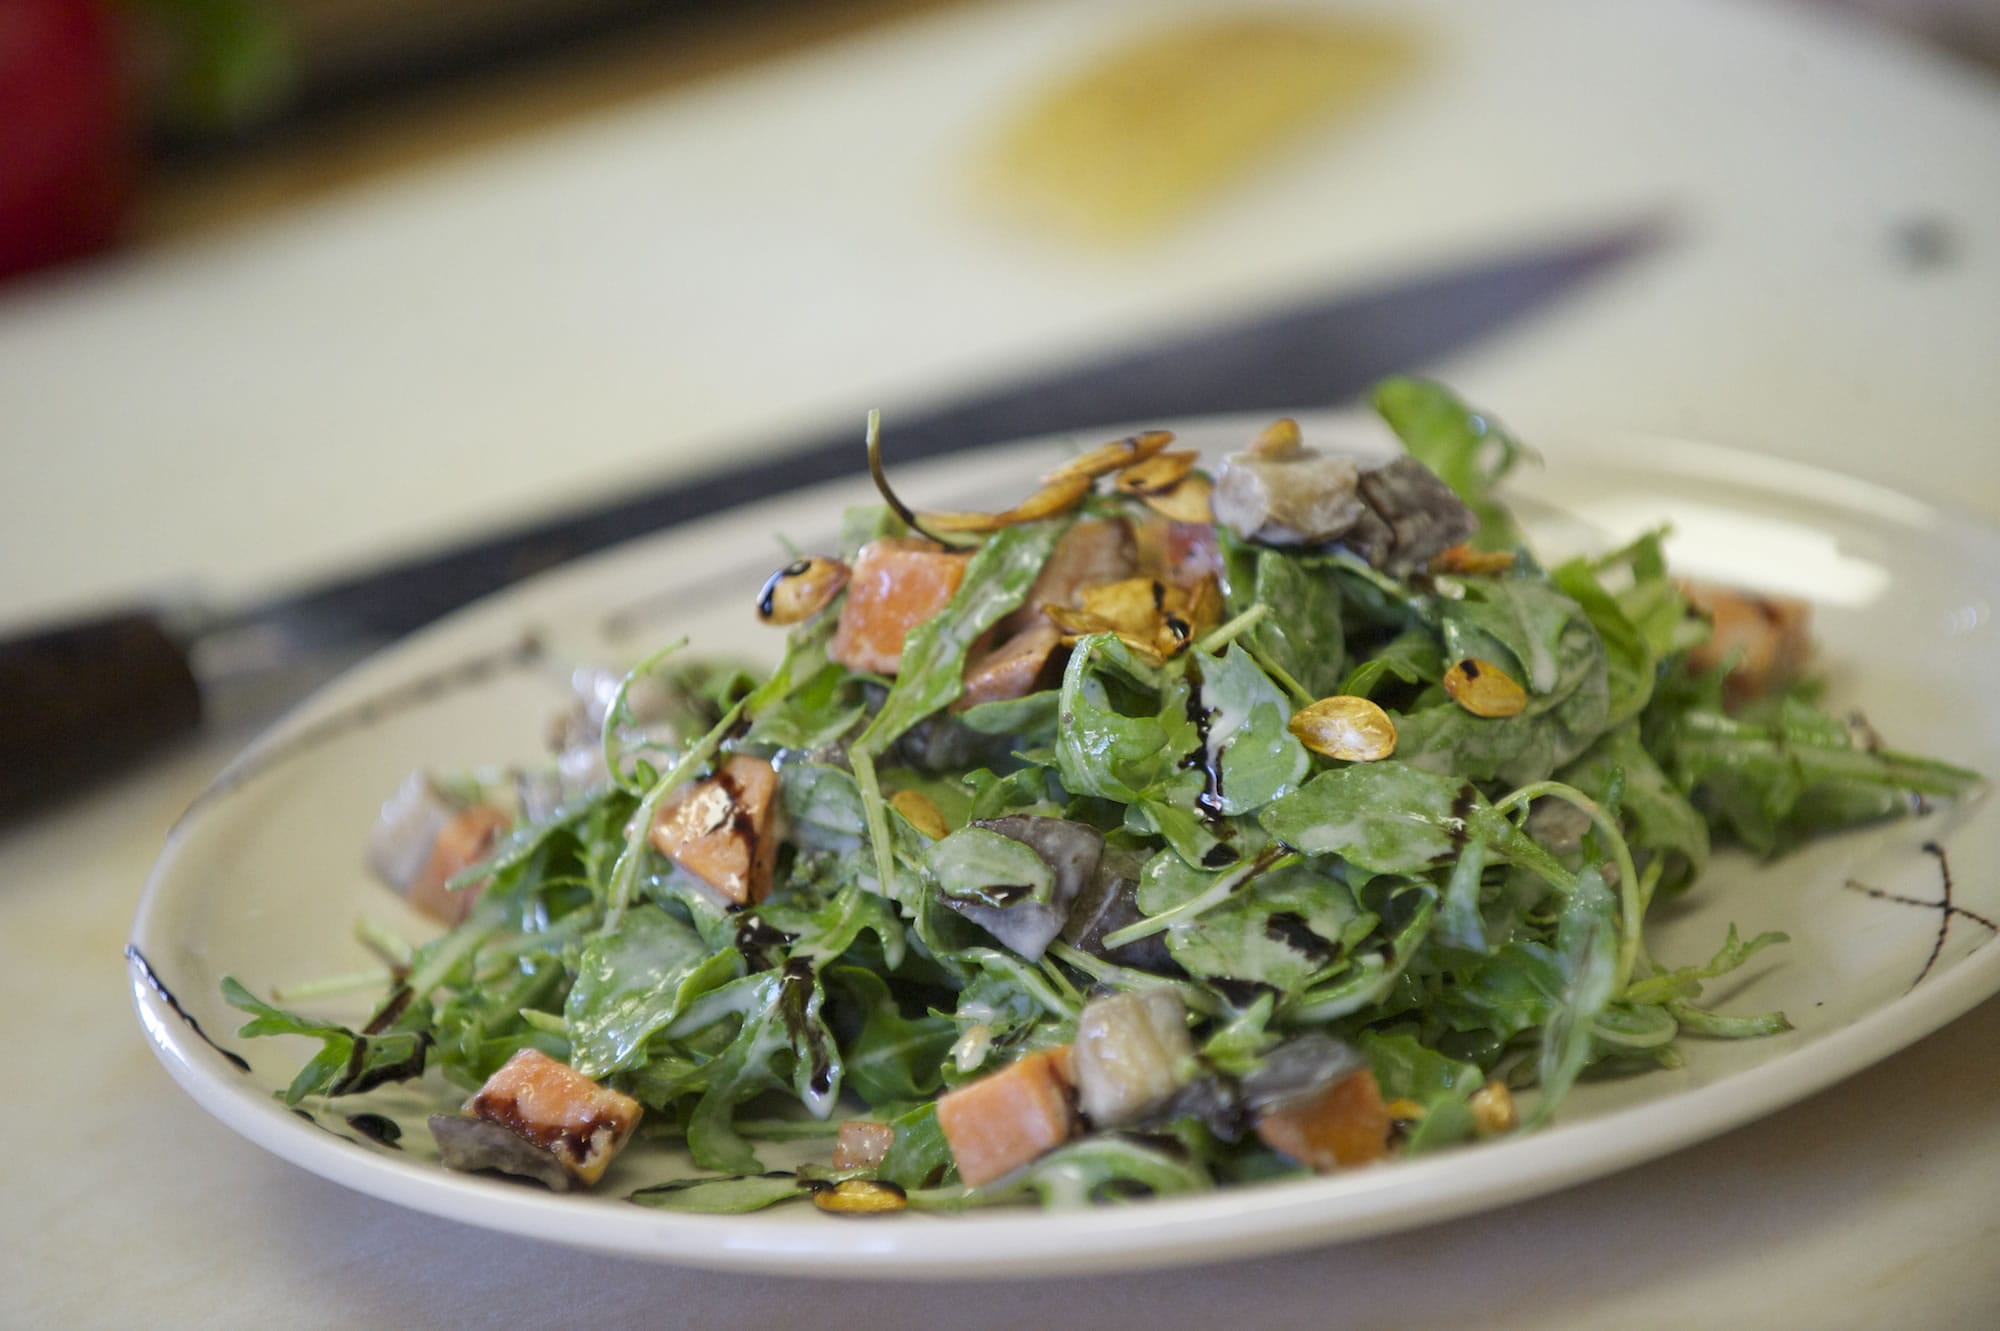 A Mint Tea salad special of arugula, yam and eggplant tossed in a tahini vinaigrette and topped with pumpkin seeds is ready for a customer at the restaurant Thursday.